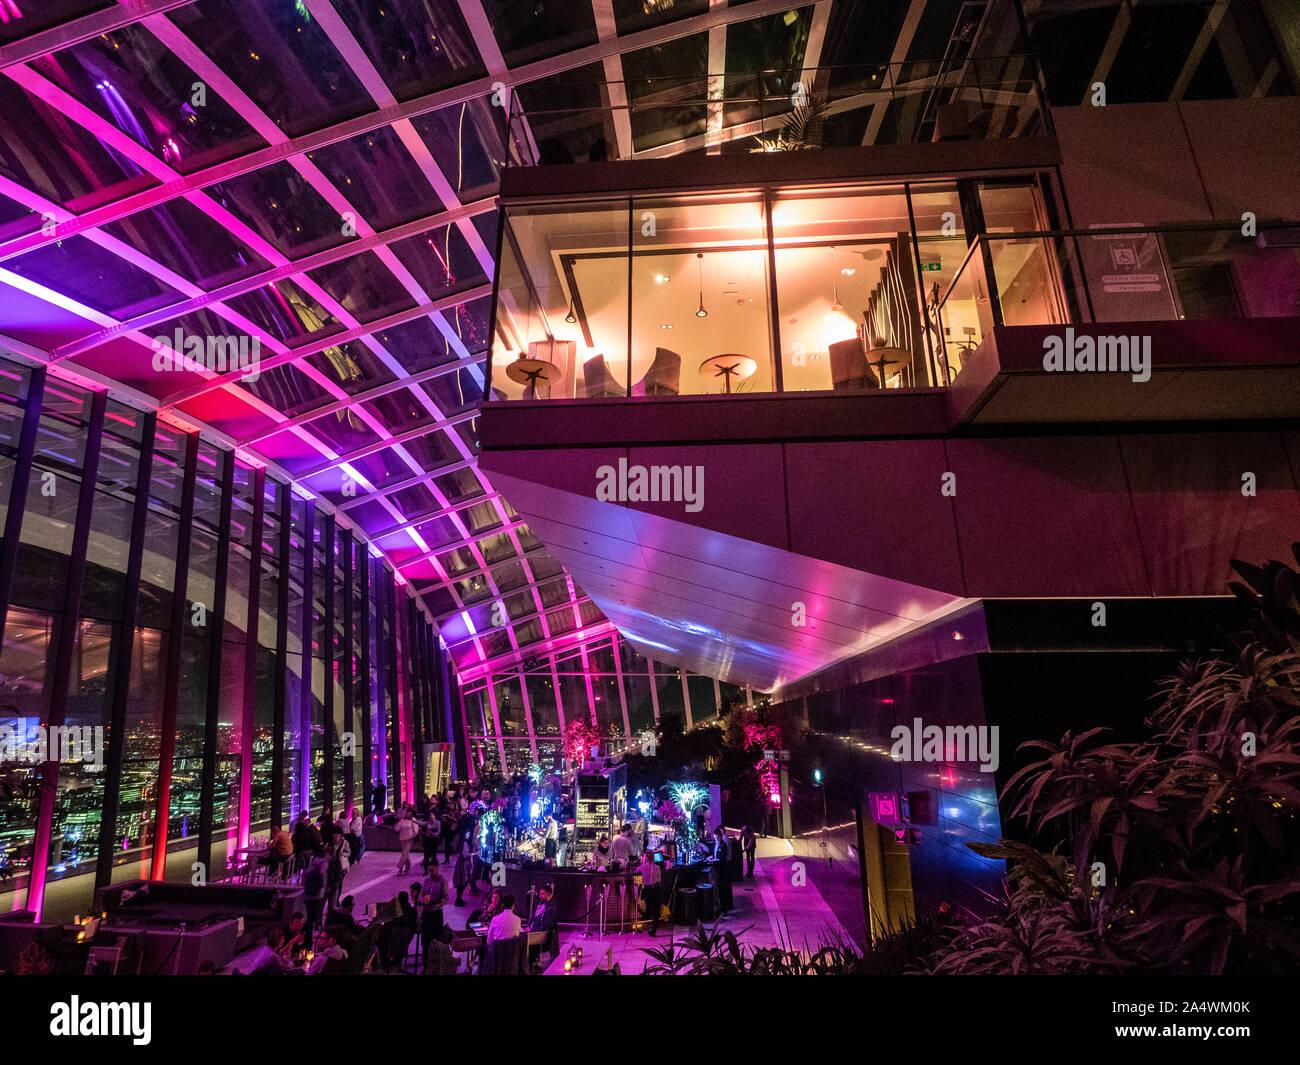 The Sky Garden at night, a 360 degree viewing area with restaurants and gardens inside the Walkie Talkie skyscraper, London, England. Stock Photo